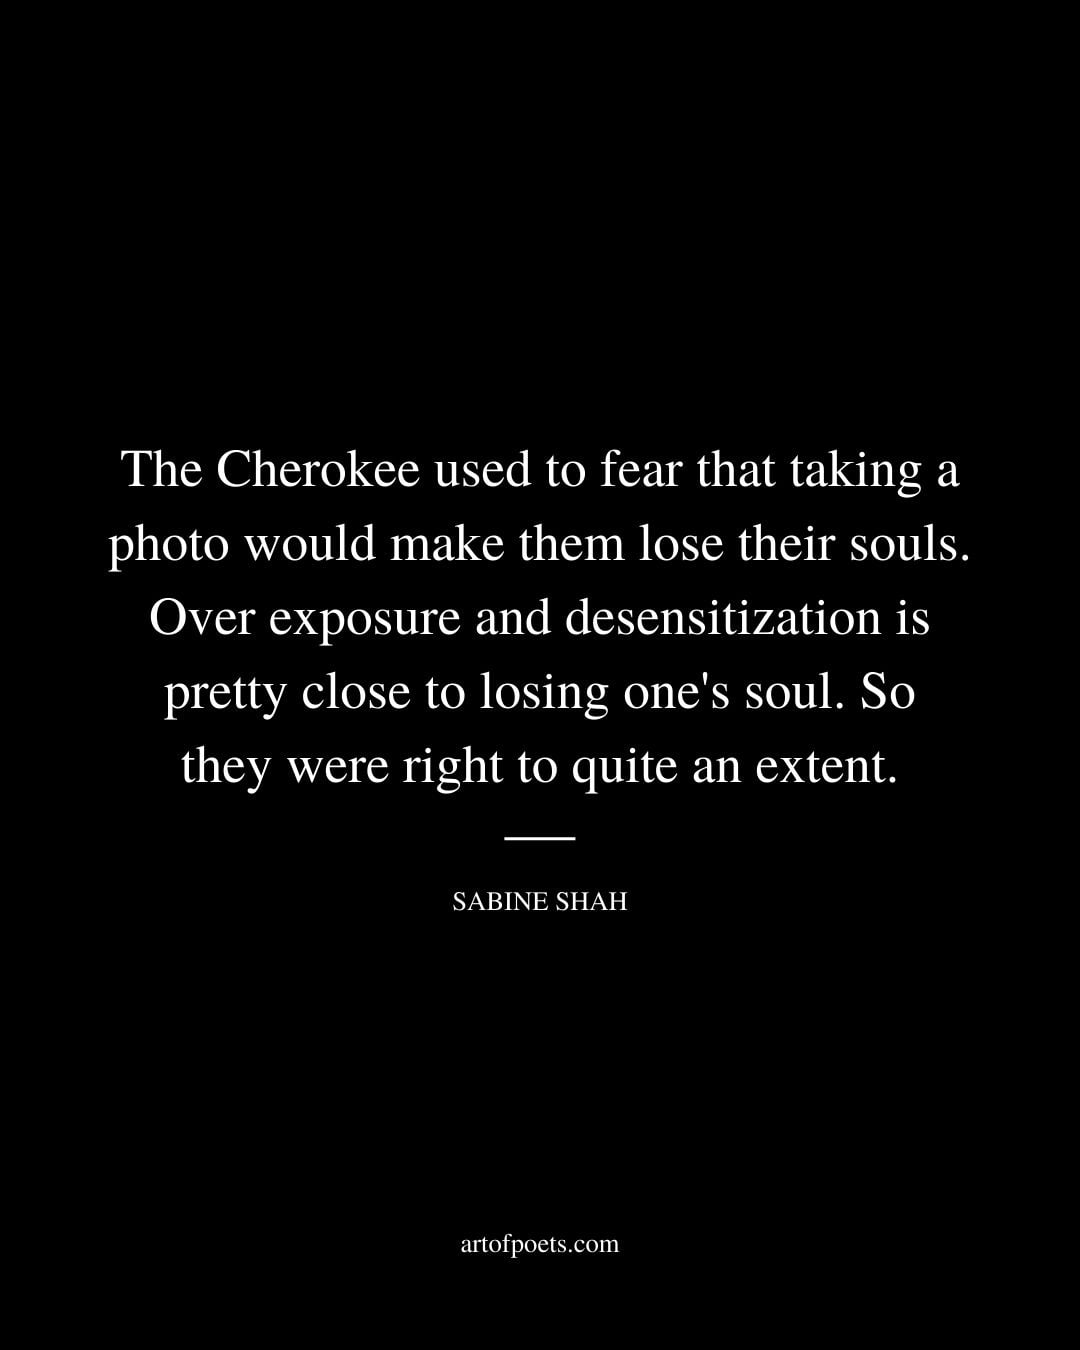 The Cherokee used to fear that taking a photo would make them lose their souls. Over exposure and desensitization is pretty close to losing ones soul. So they were right to quite an extent. Sabine Shah